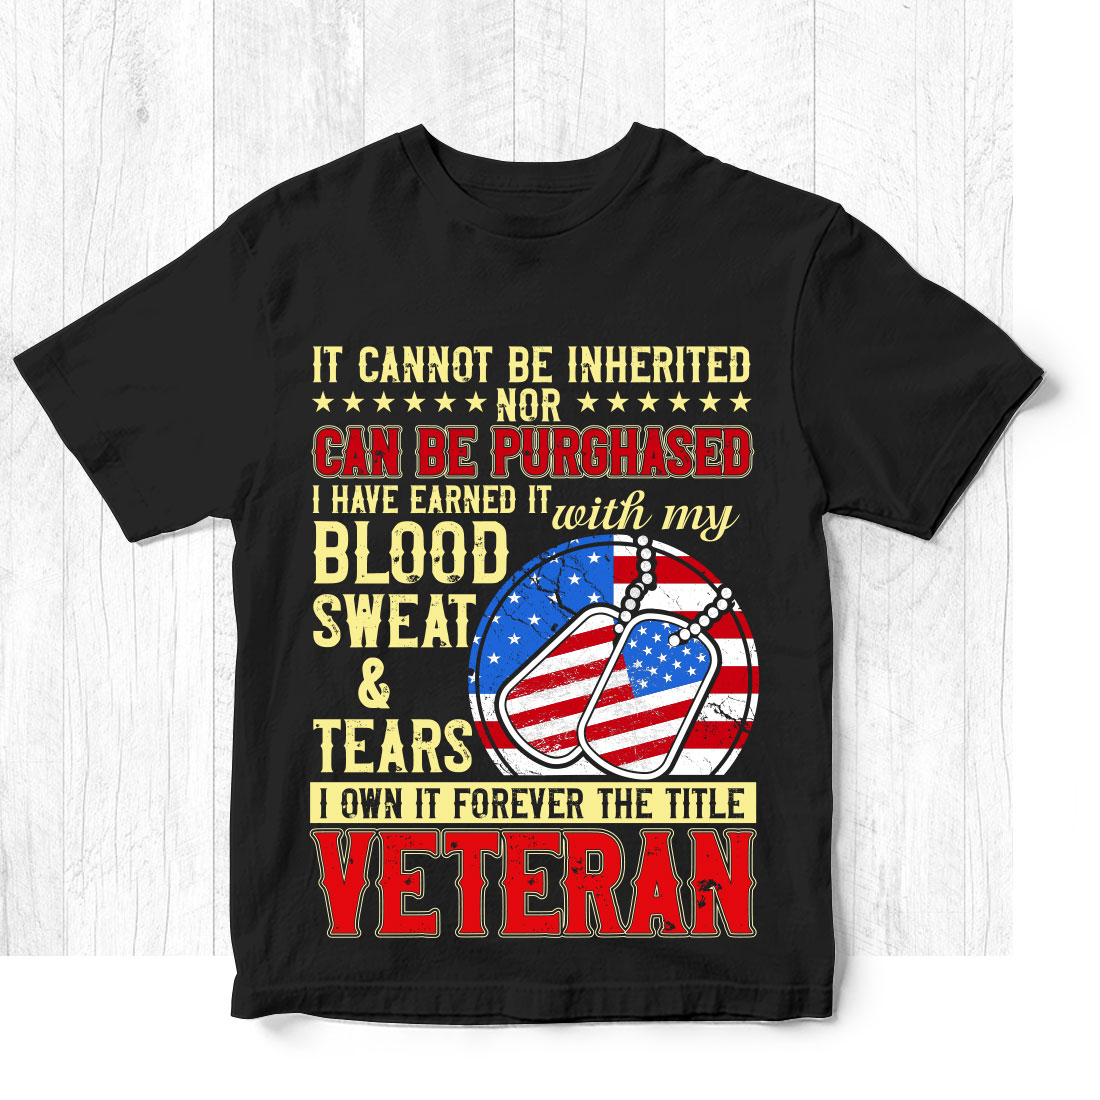 Black t - shirt with an american flag design.